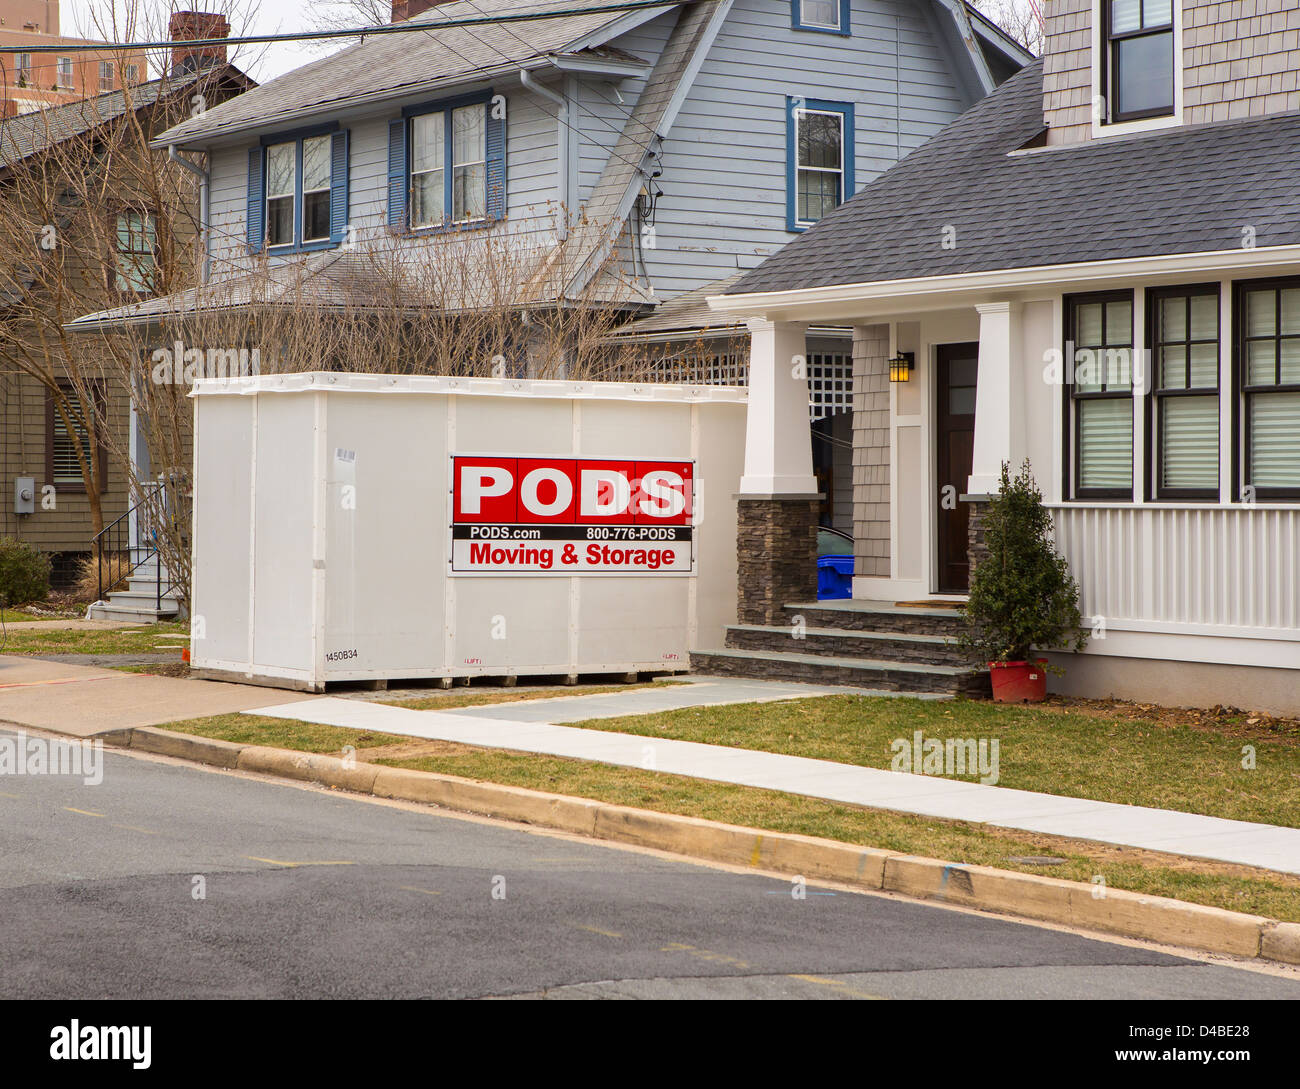 ARLINGTON, VIRGINIA, USA - PODS storage container in front of houses. Stock Photo